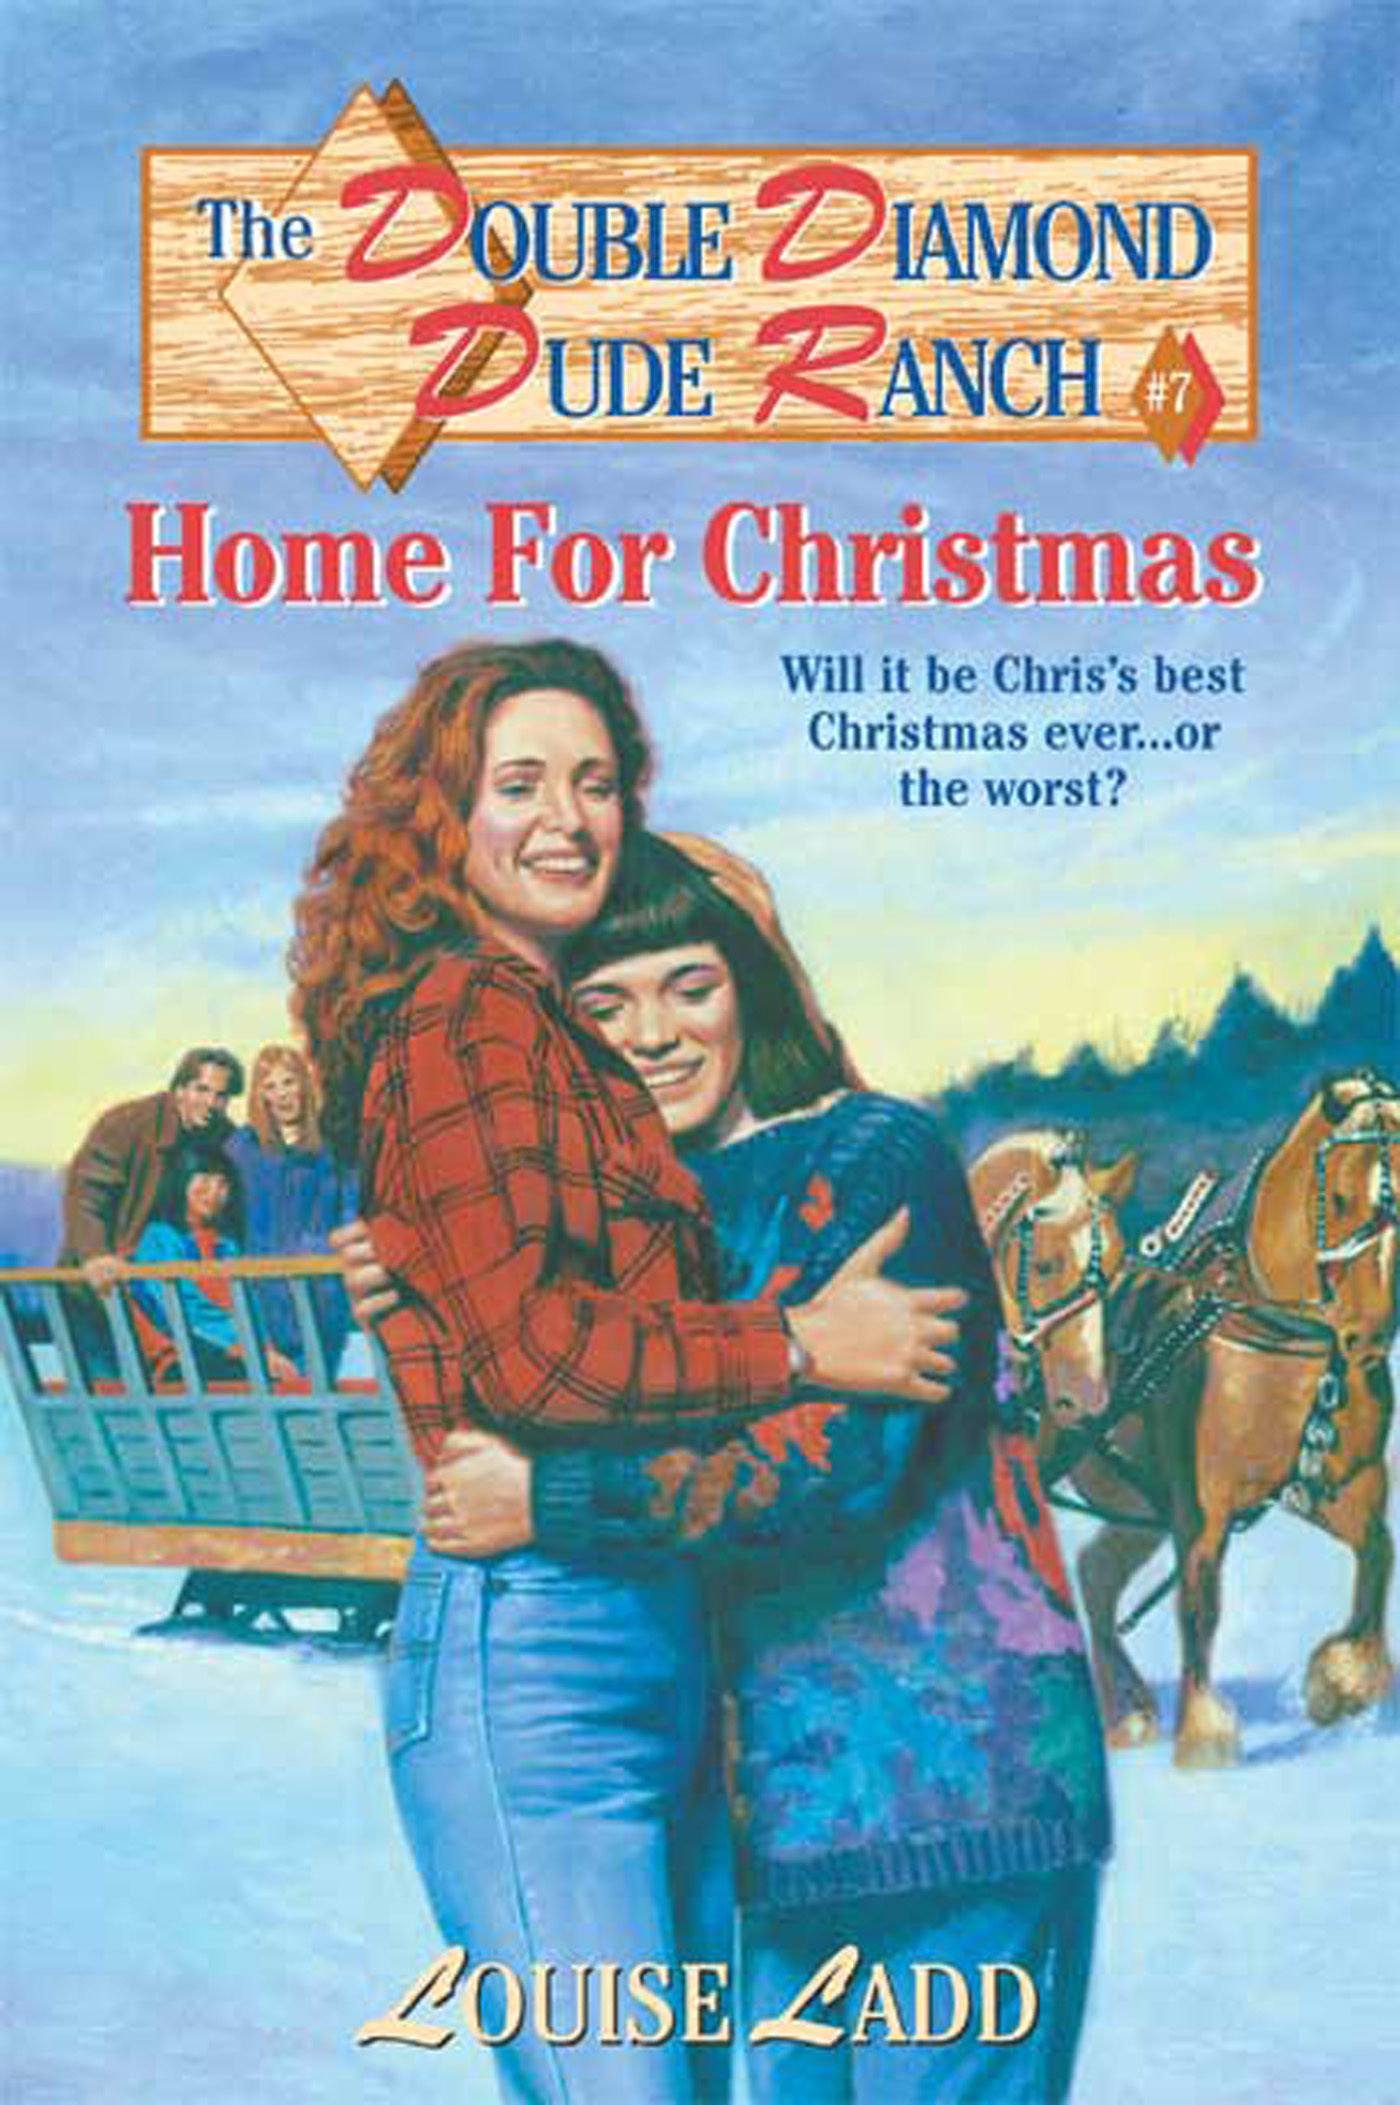 Double Diamond Dude Ranch #7 - Home for Christmas by Louise Ladd